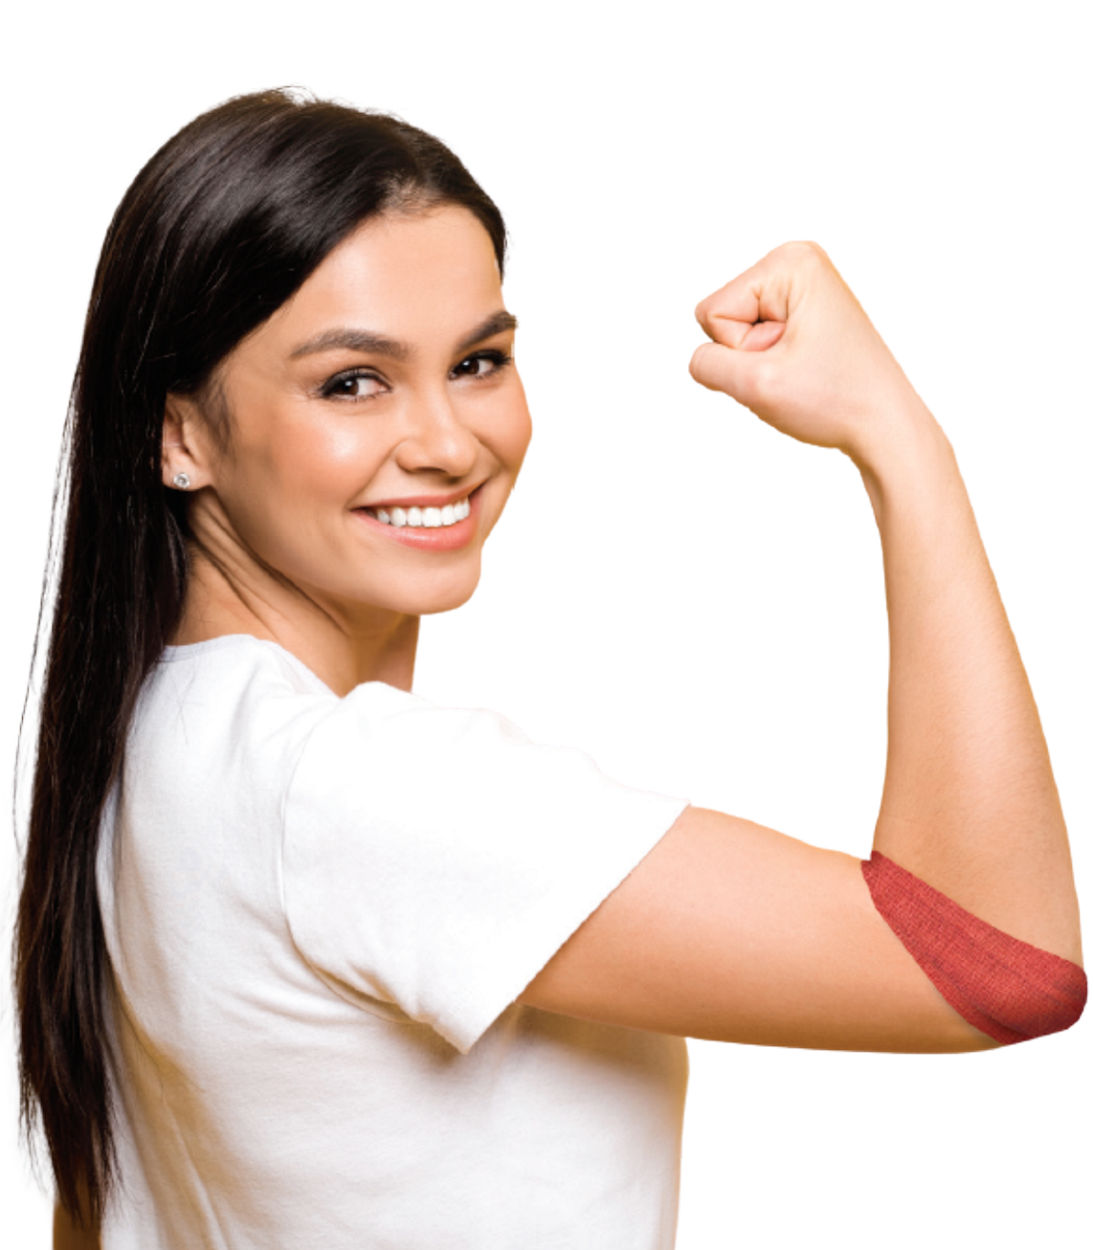 Woman flexing arm, showing off her blood donation bandage